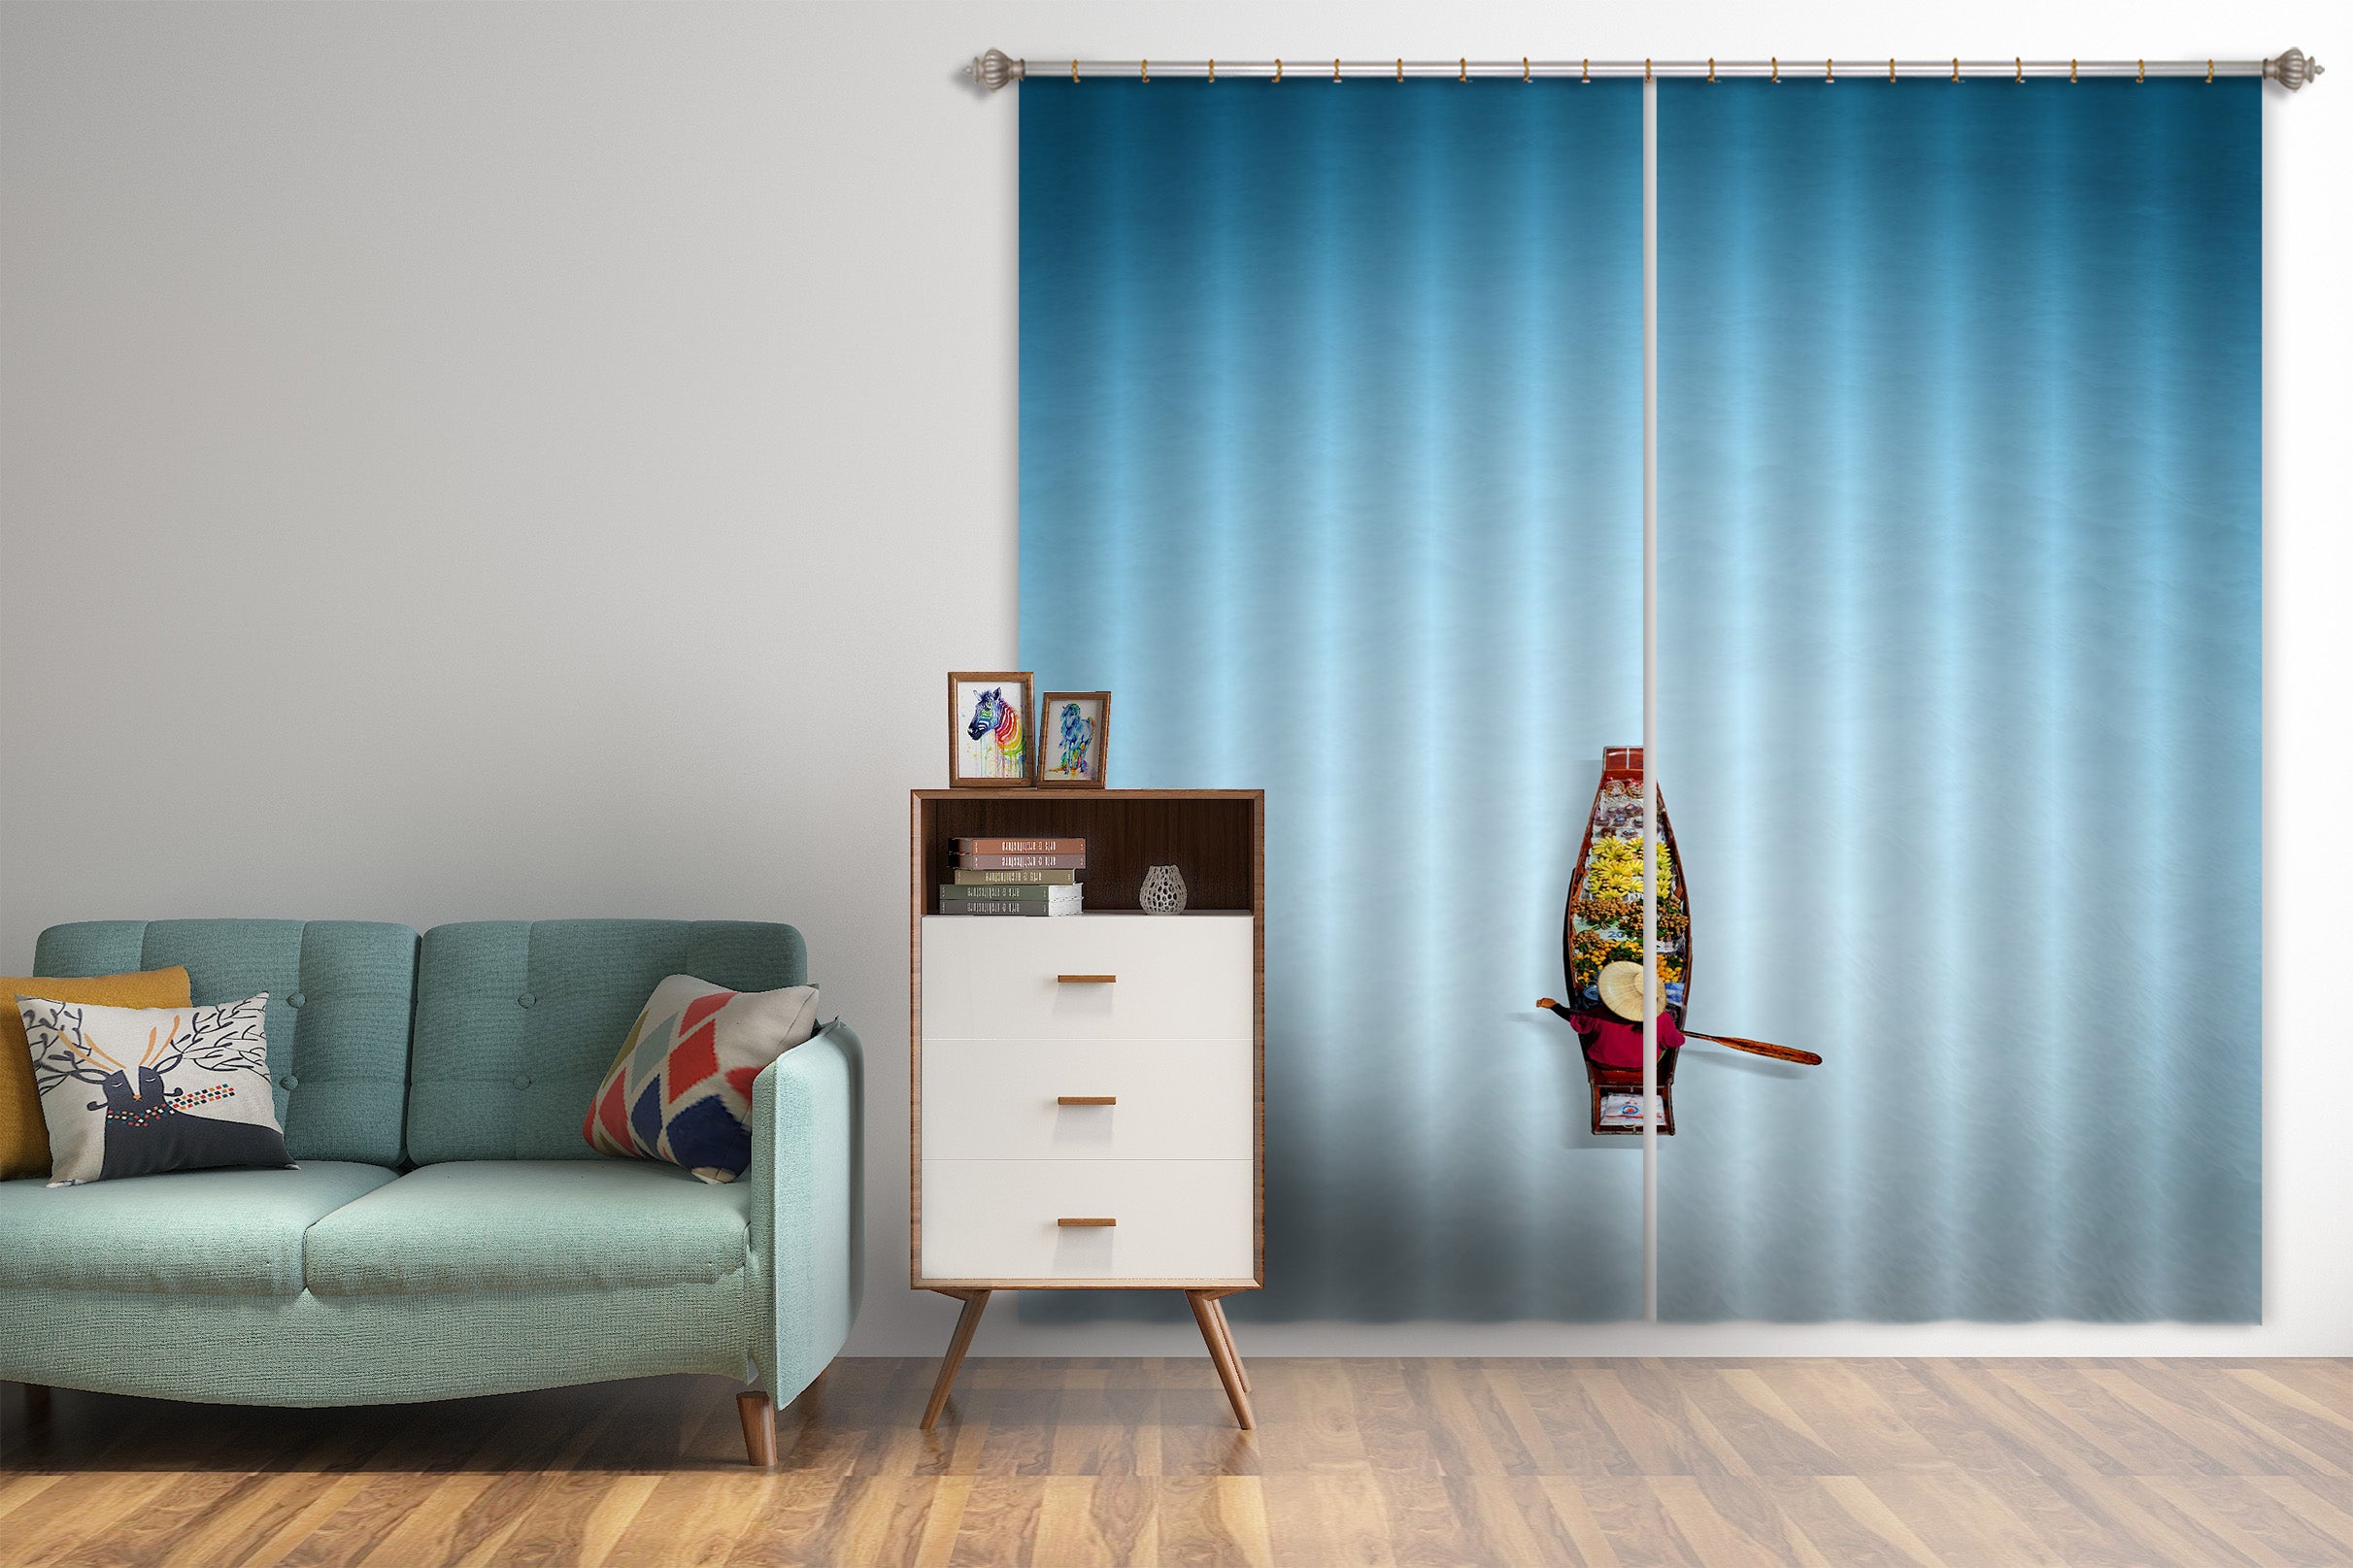 3D Boat In Water 074 Marco Carmassi Curtain Curtains Drapes